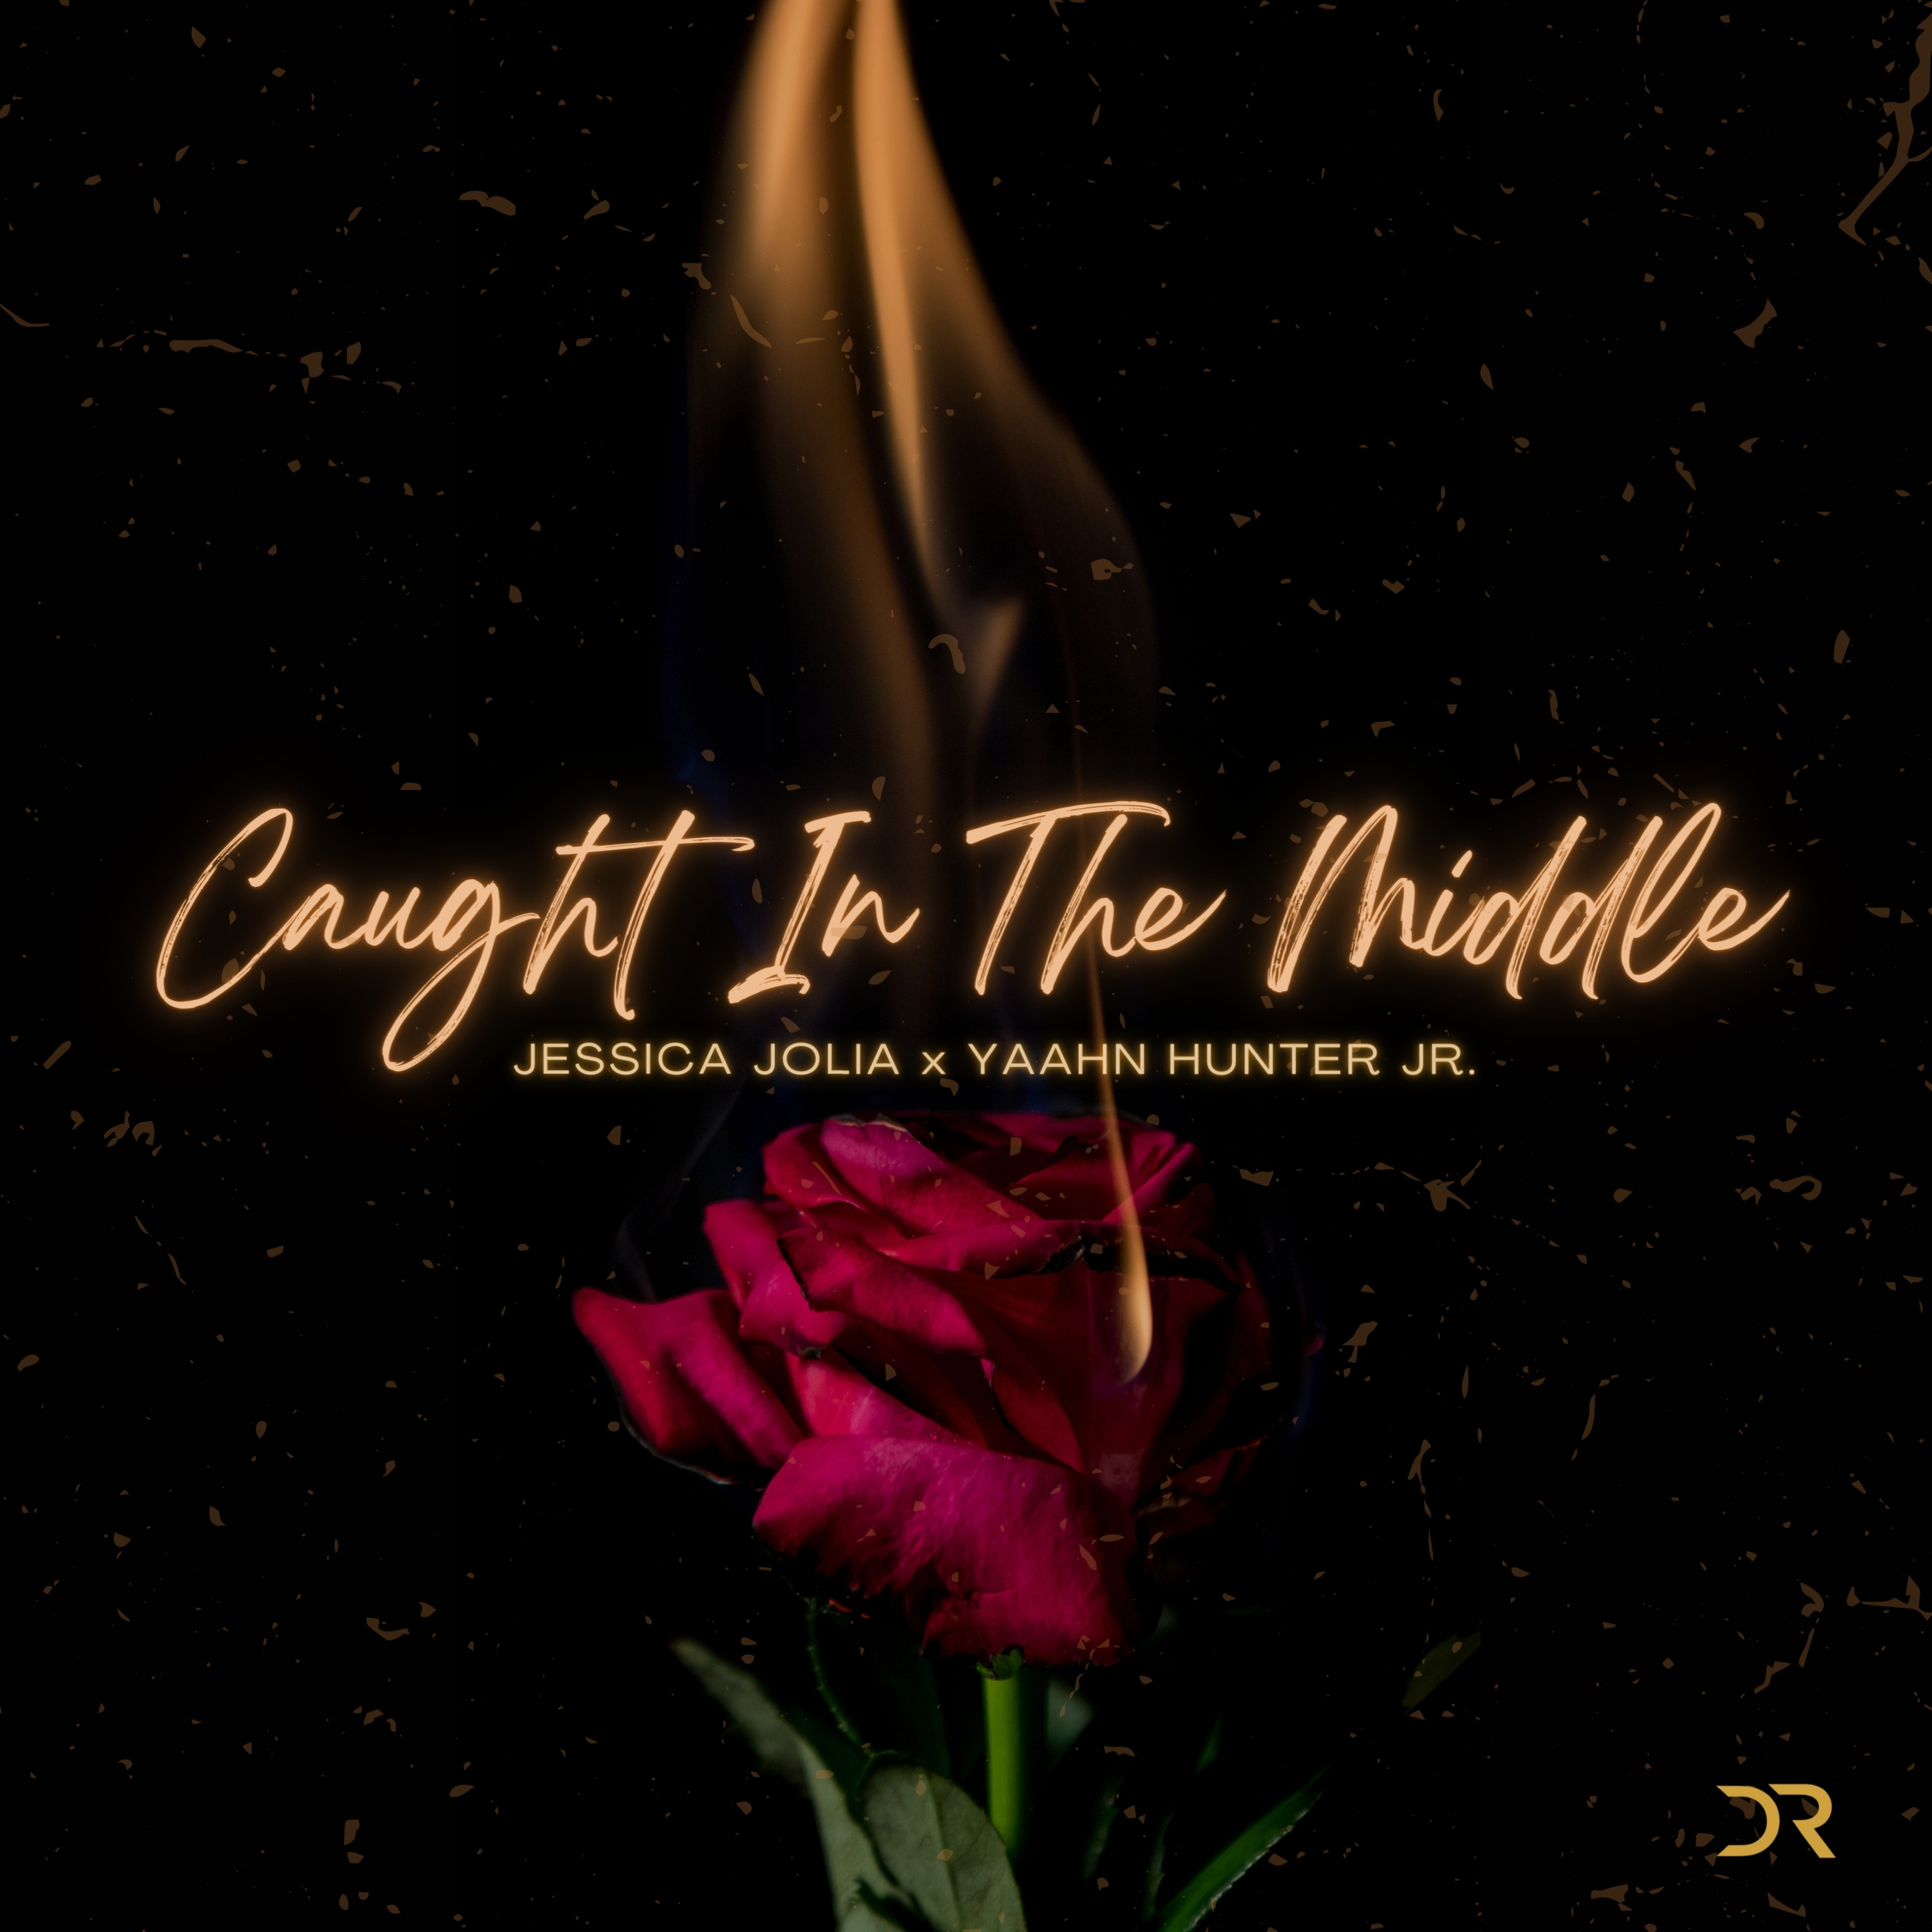 Emerging R&B Sensation Jessica Jolia Returns with Soul-Stirring Single “Caught In The Middle”